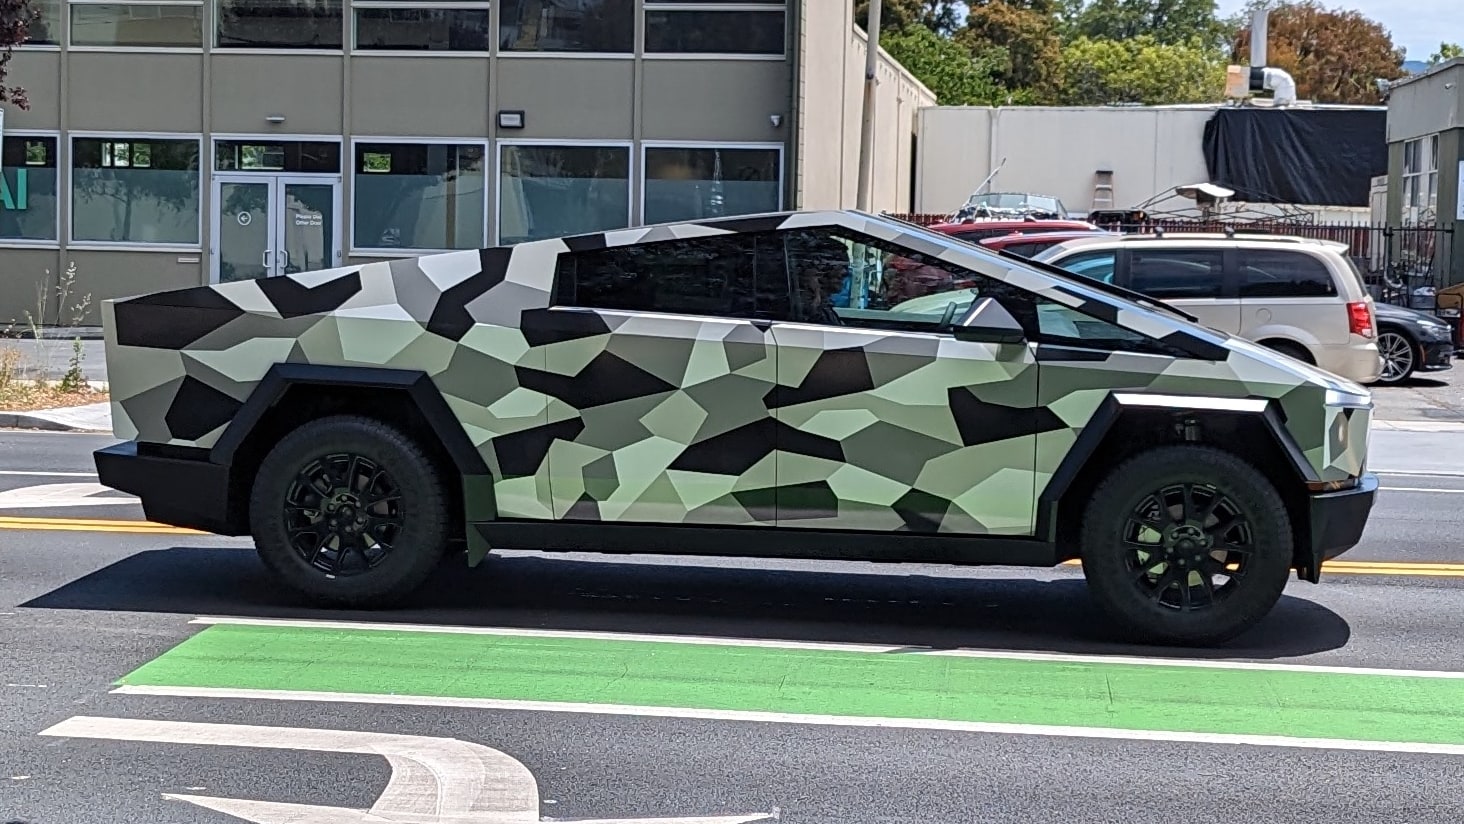 The Cybertruck was spotted with this camouflage wrap